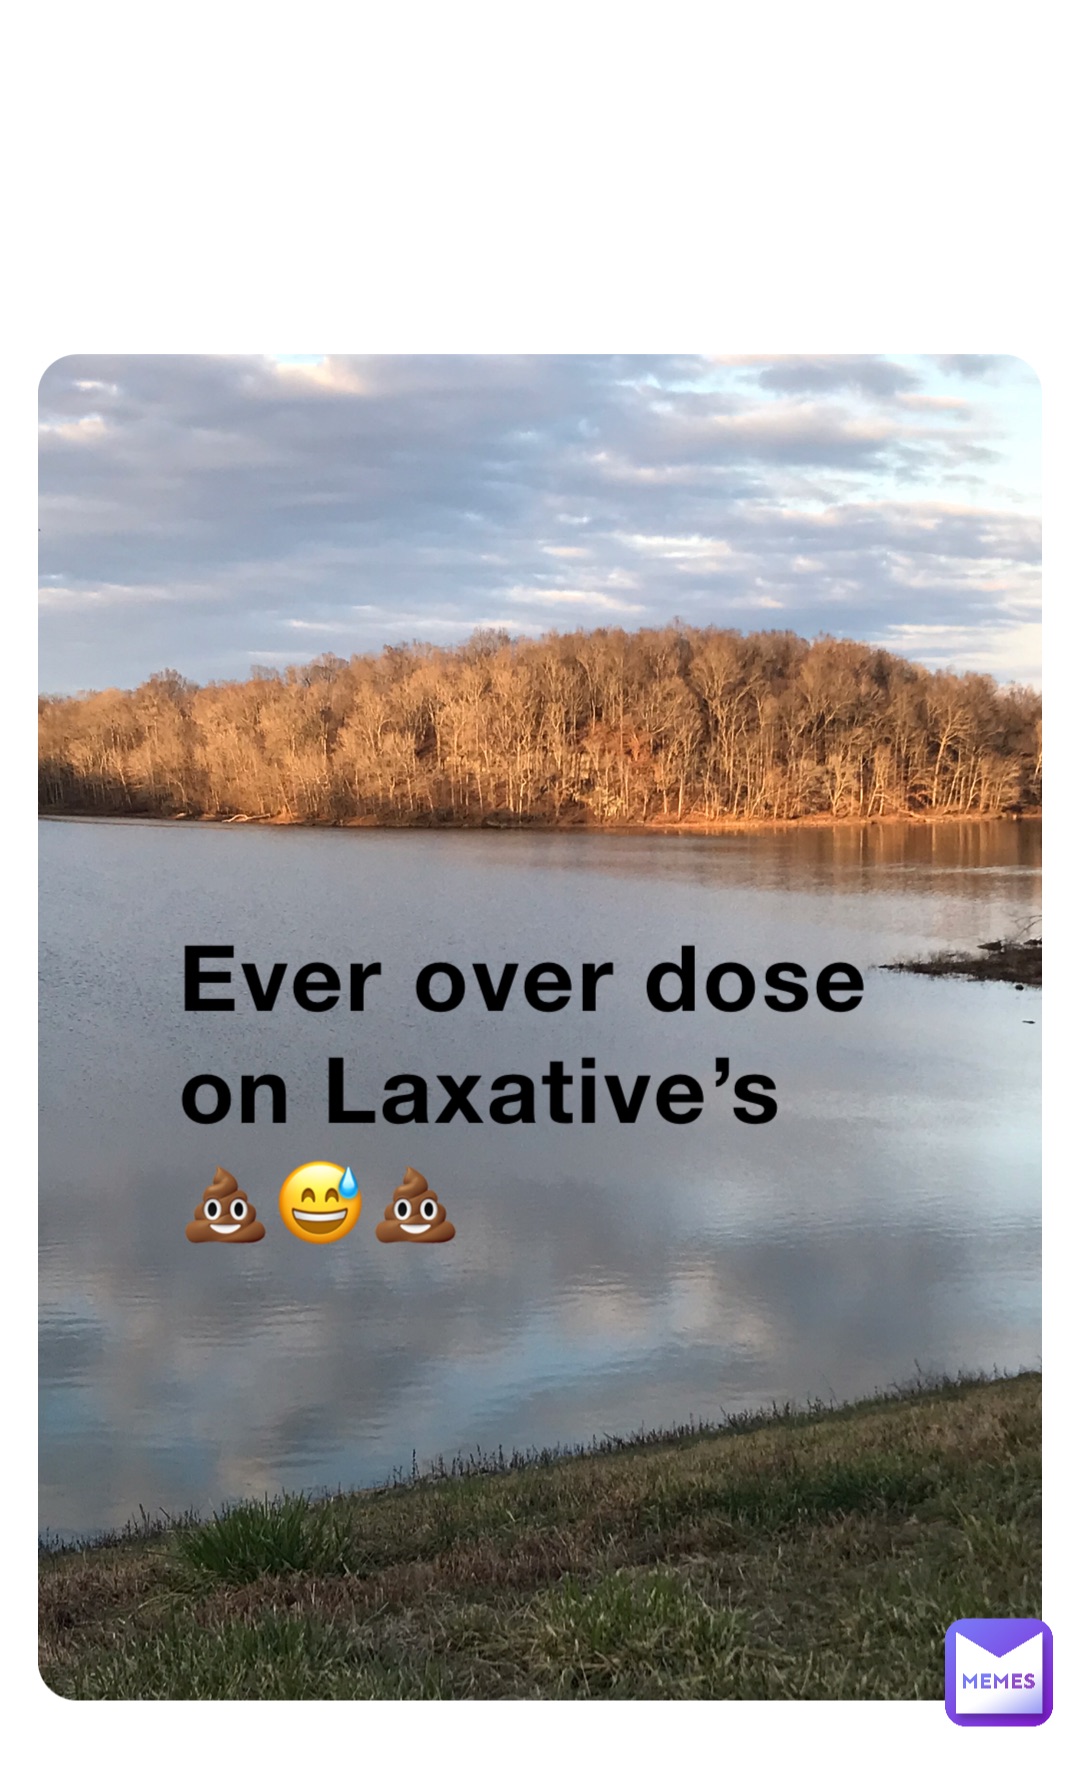 Ever over dose on Laxative’s
💩😅💩